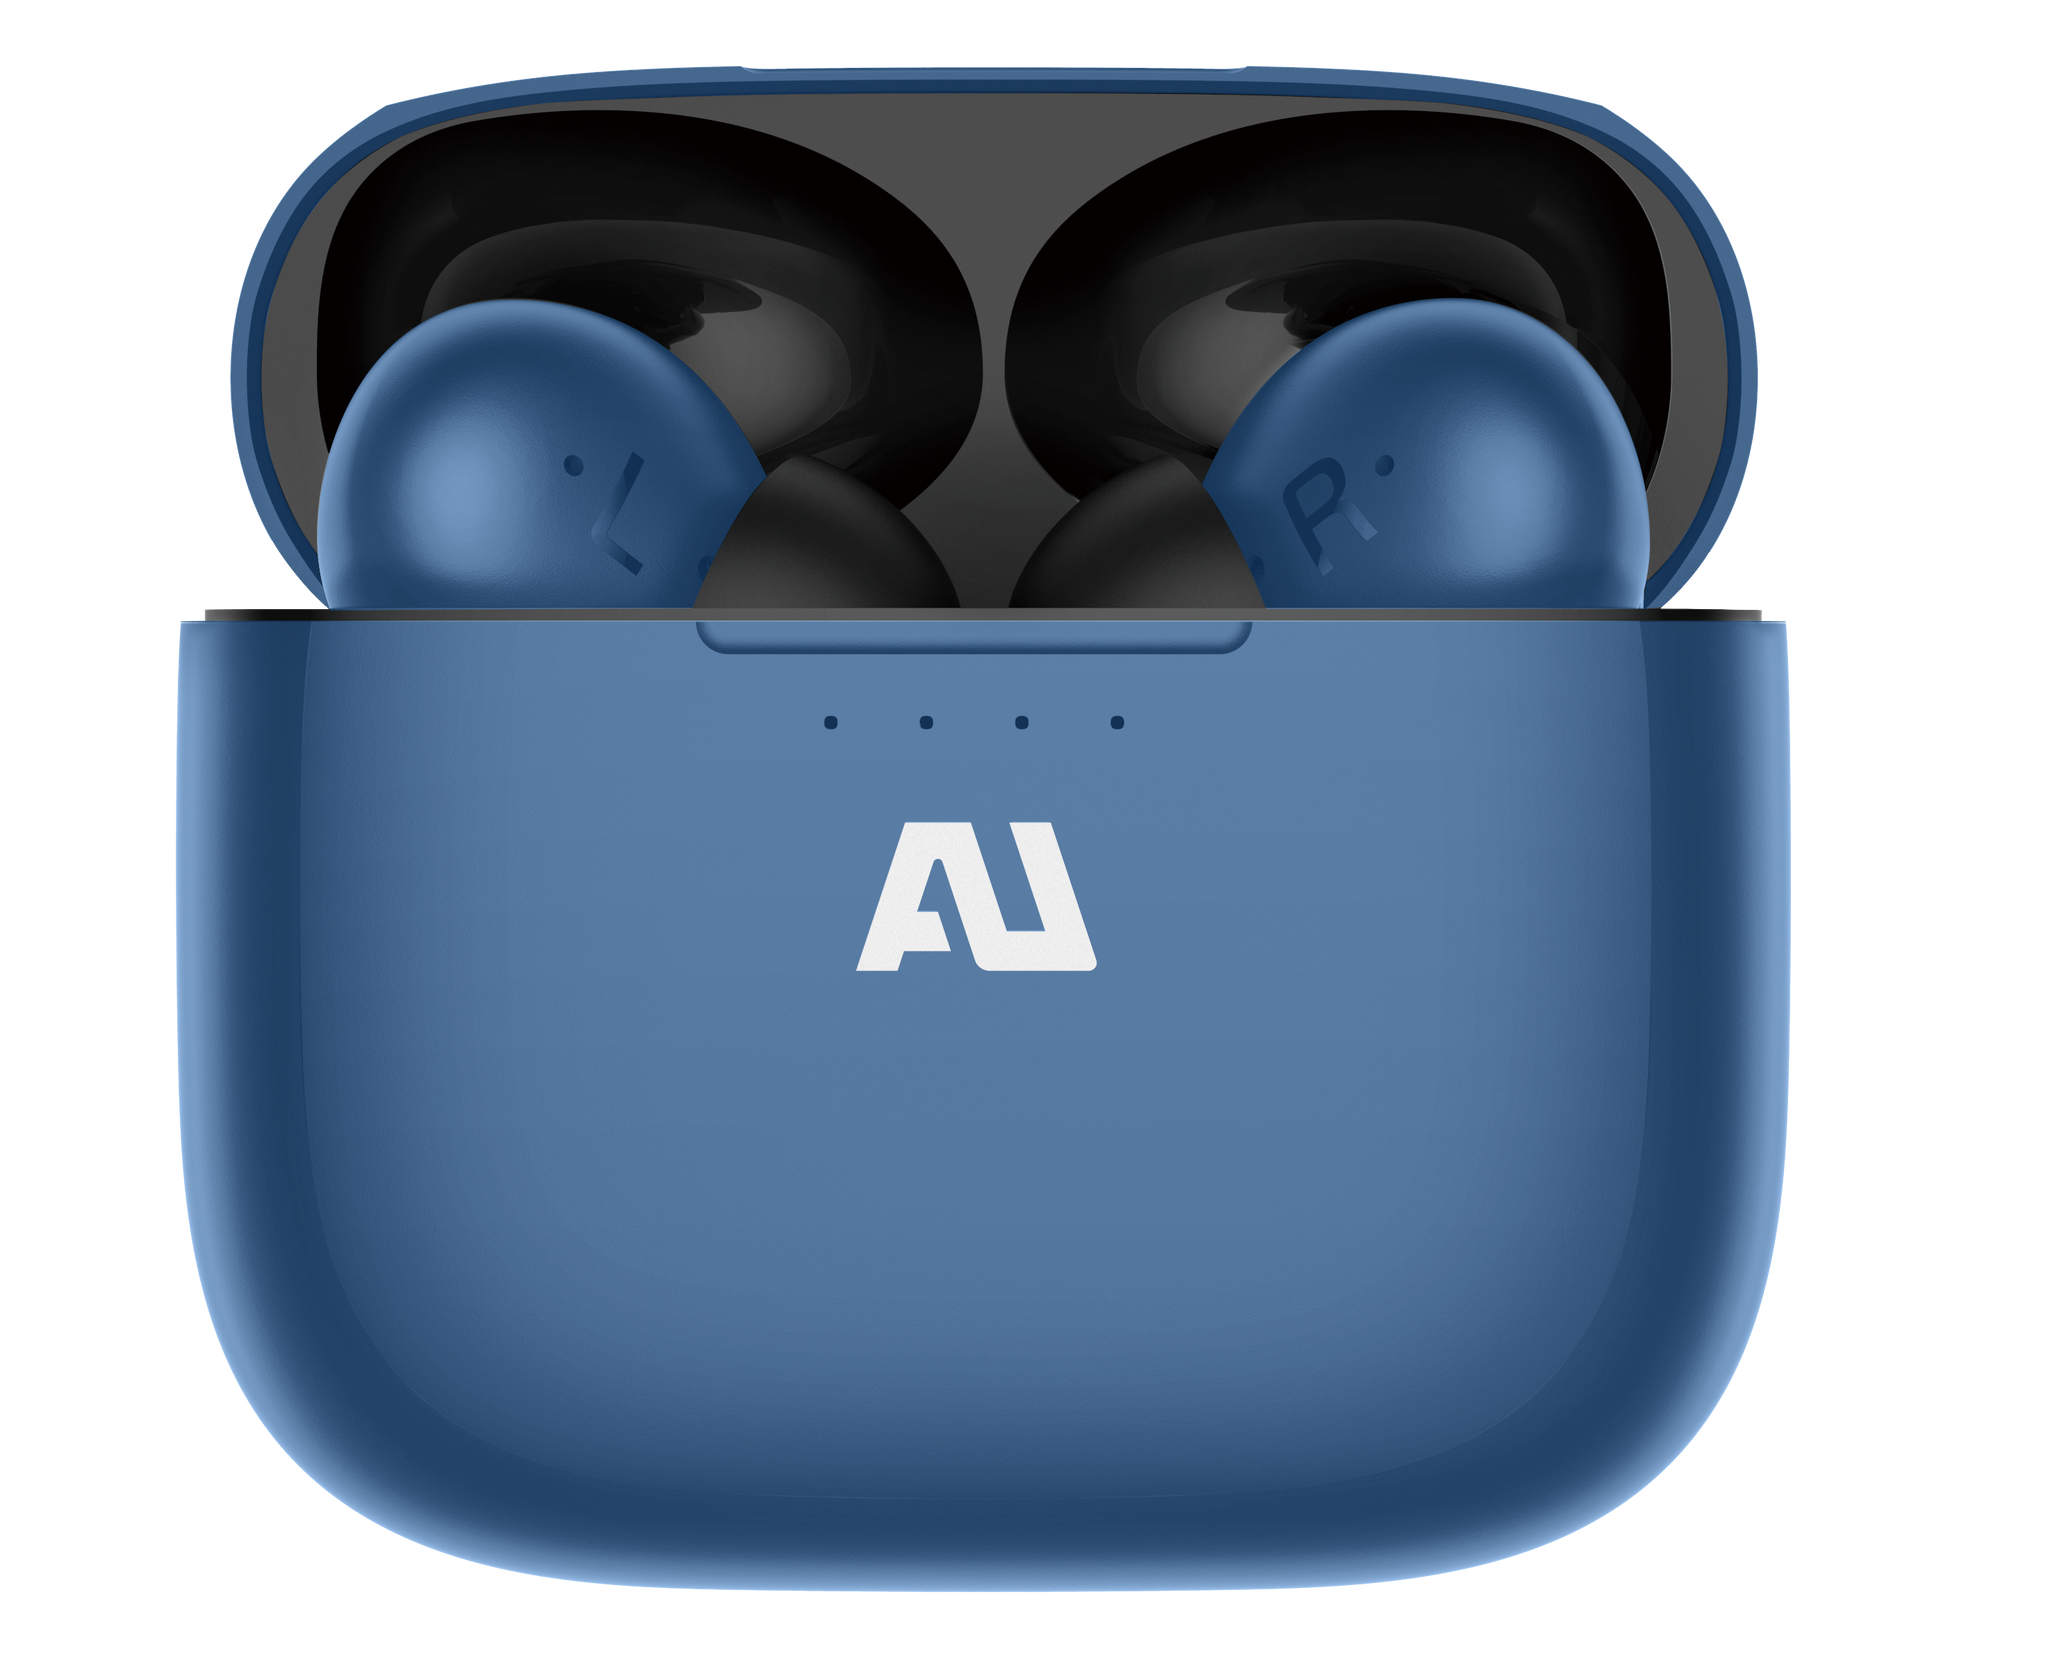 AU-Frequency ANC | True Wireless Noise-Cancelling Earbuds